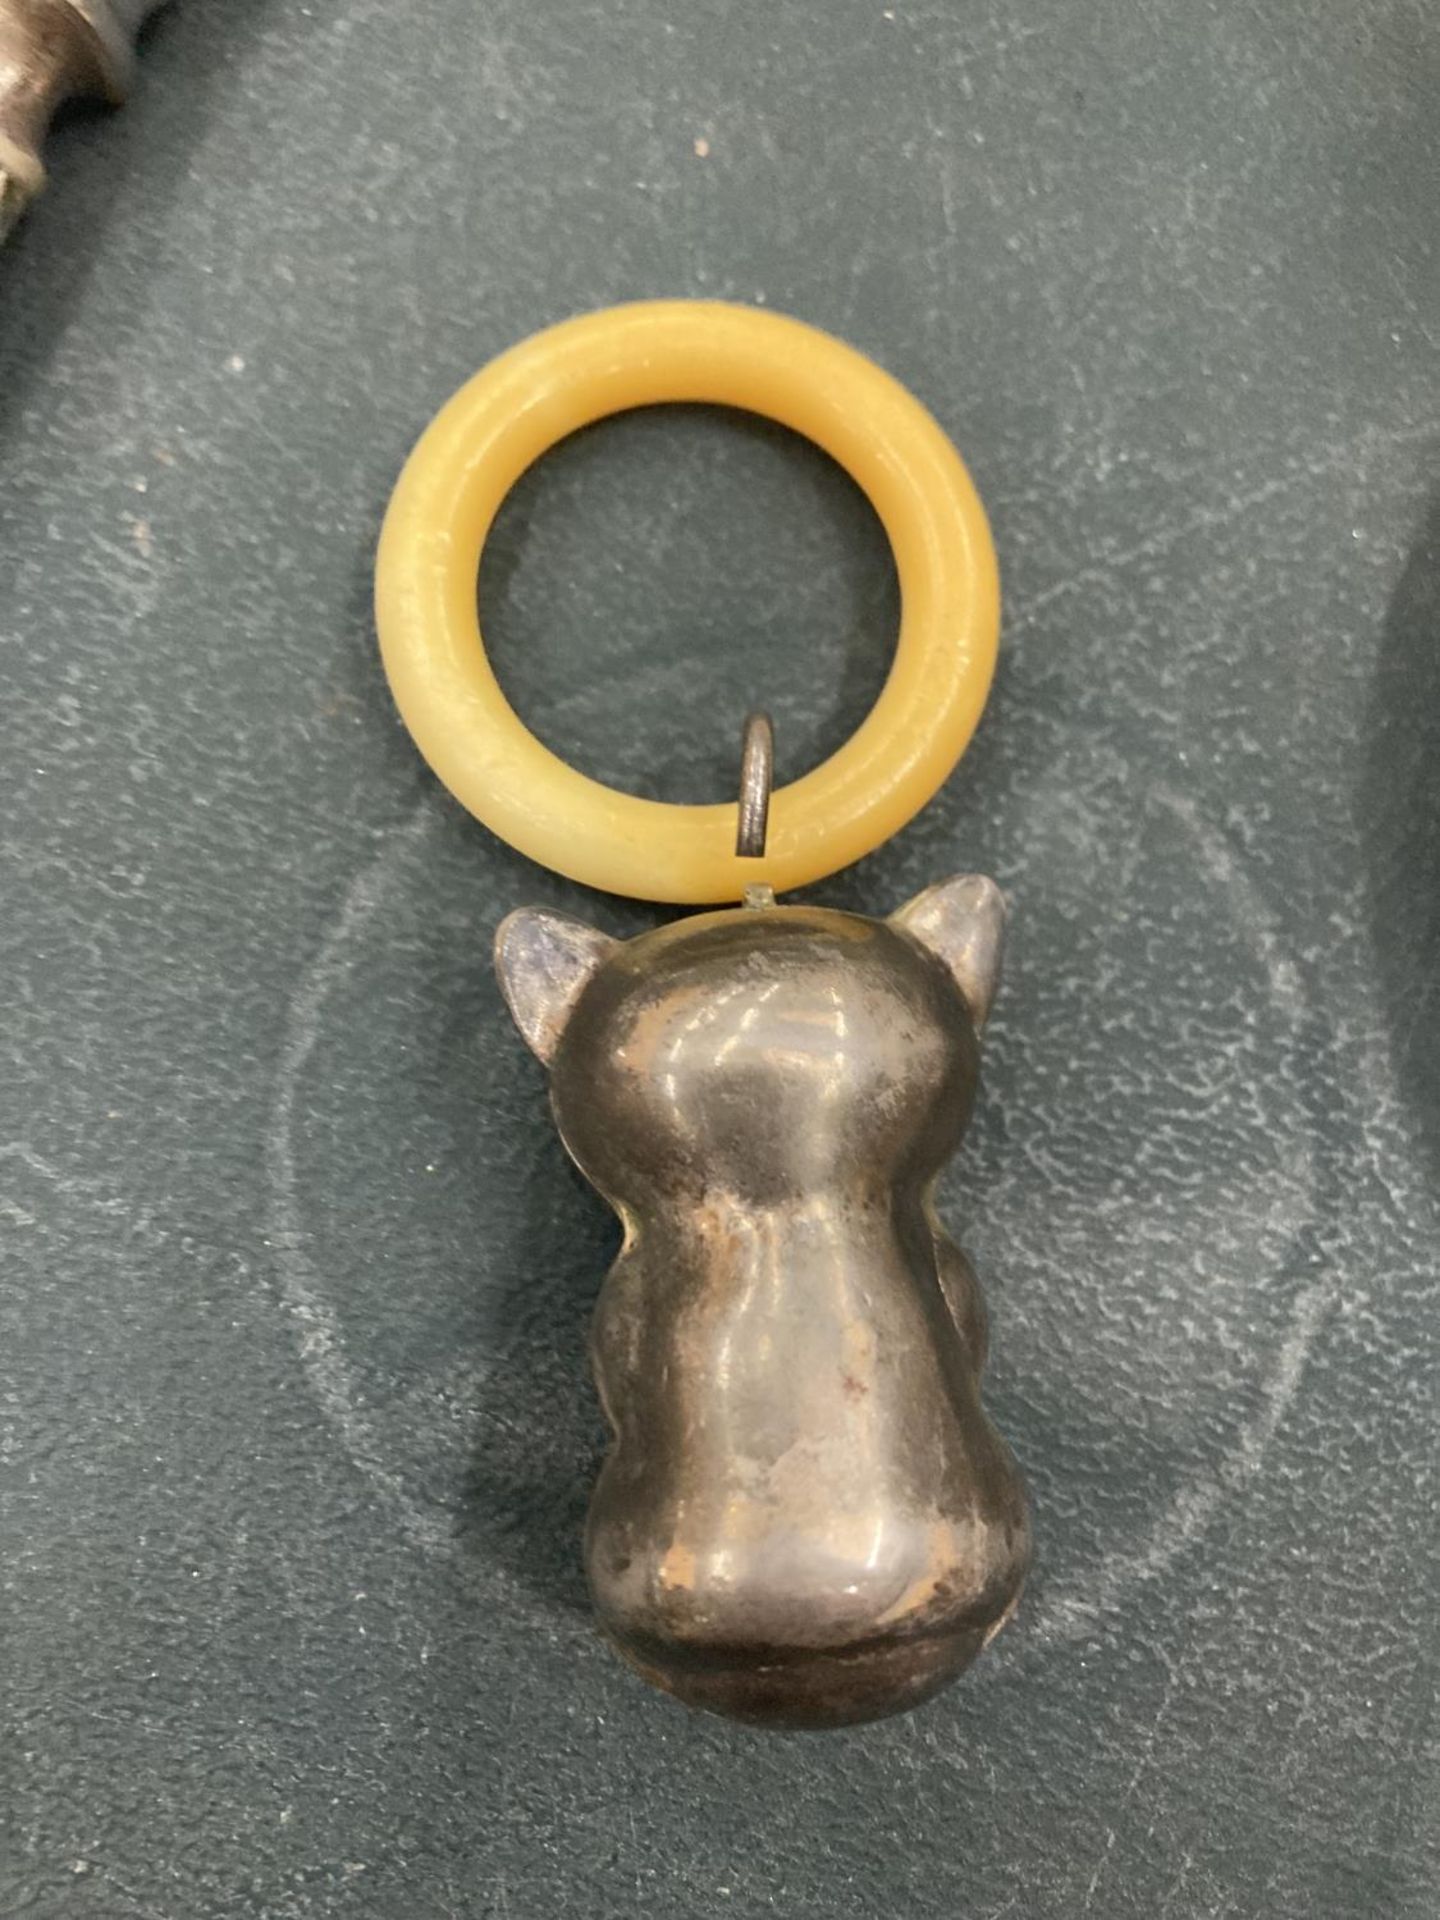 AN EARLY 20TH CENTURY TEETHING RING WITH TEDDY BEAR CHARM - Image 3 of 3